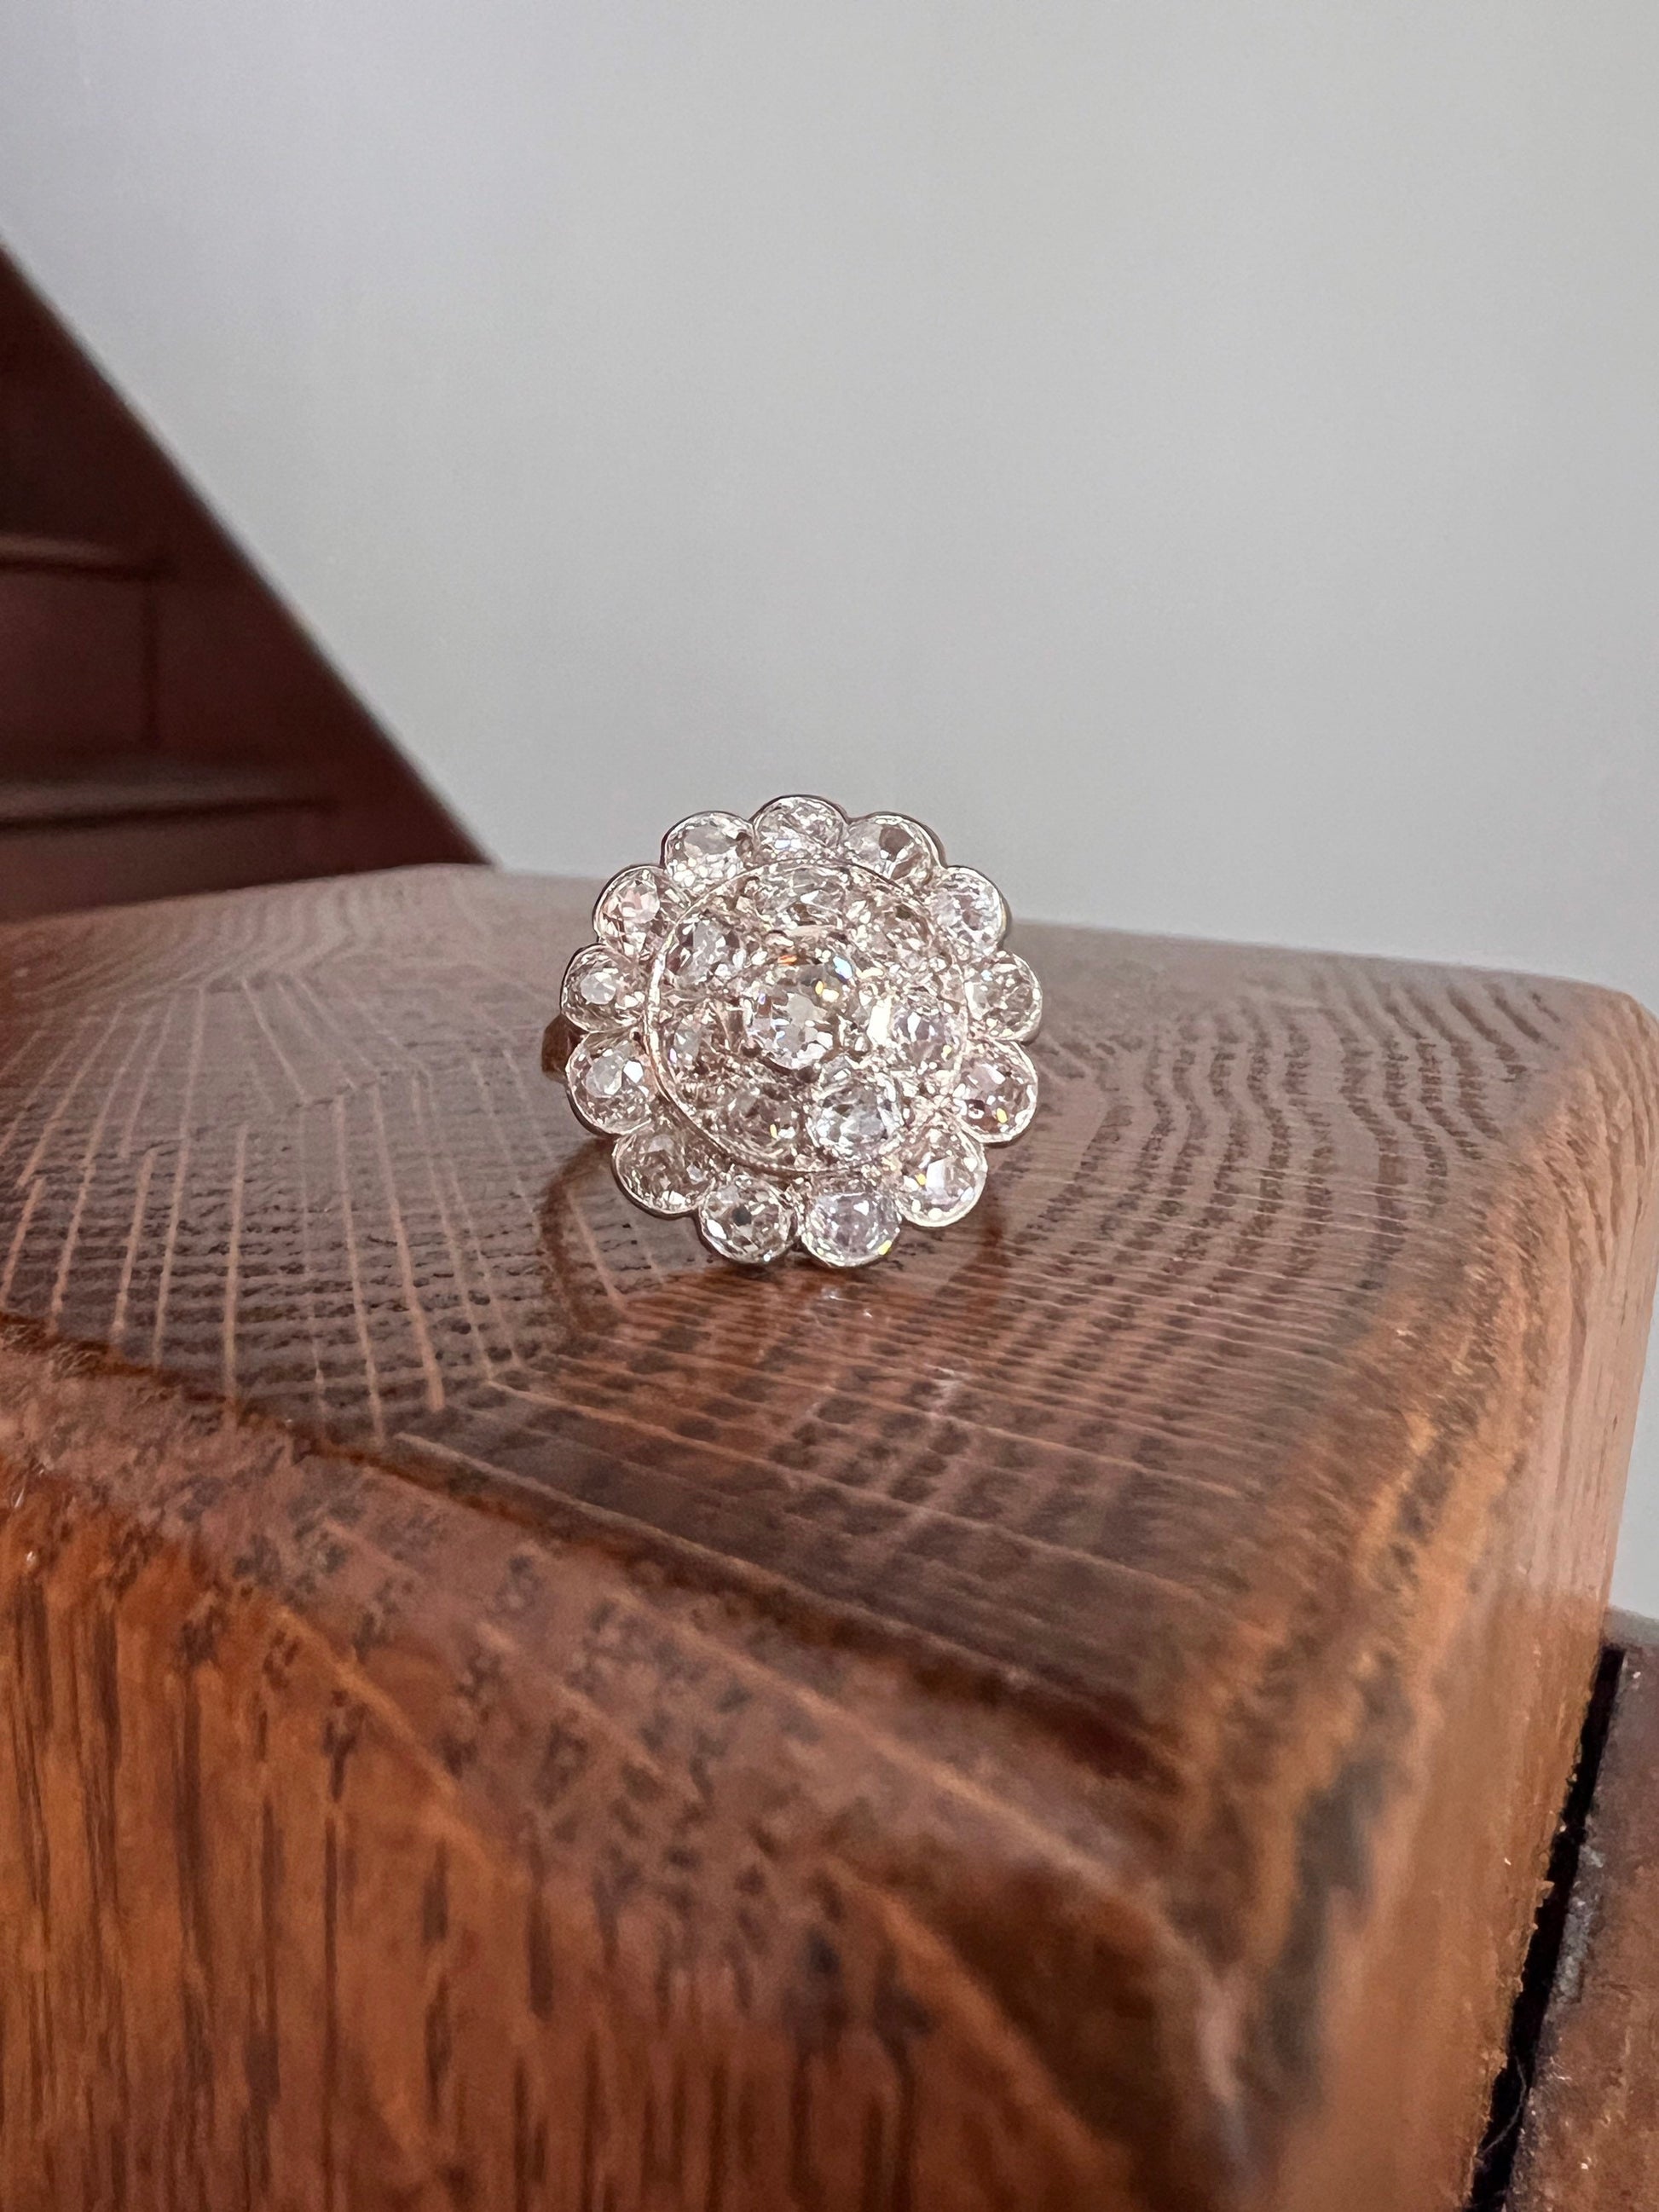 Large FRENCH Antique 2.5 Carat + 21 Old Mine Cut DiAMOND Cluster RiNG 18k Gold Daisy Halo Stacker Romantic Gift Floral OMC Belle Epoque XL